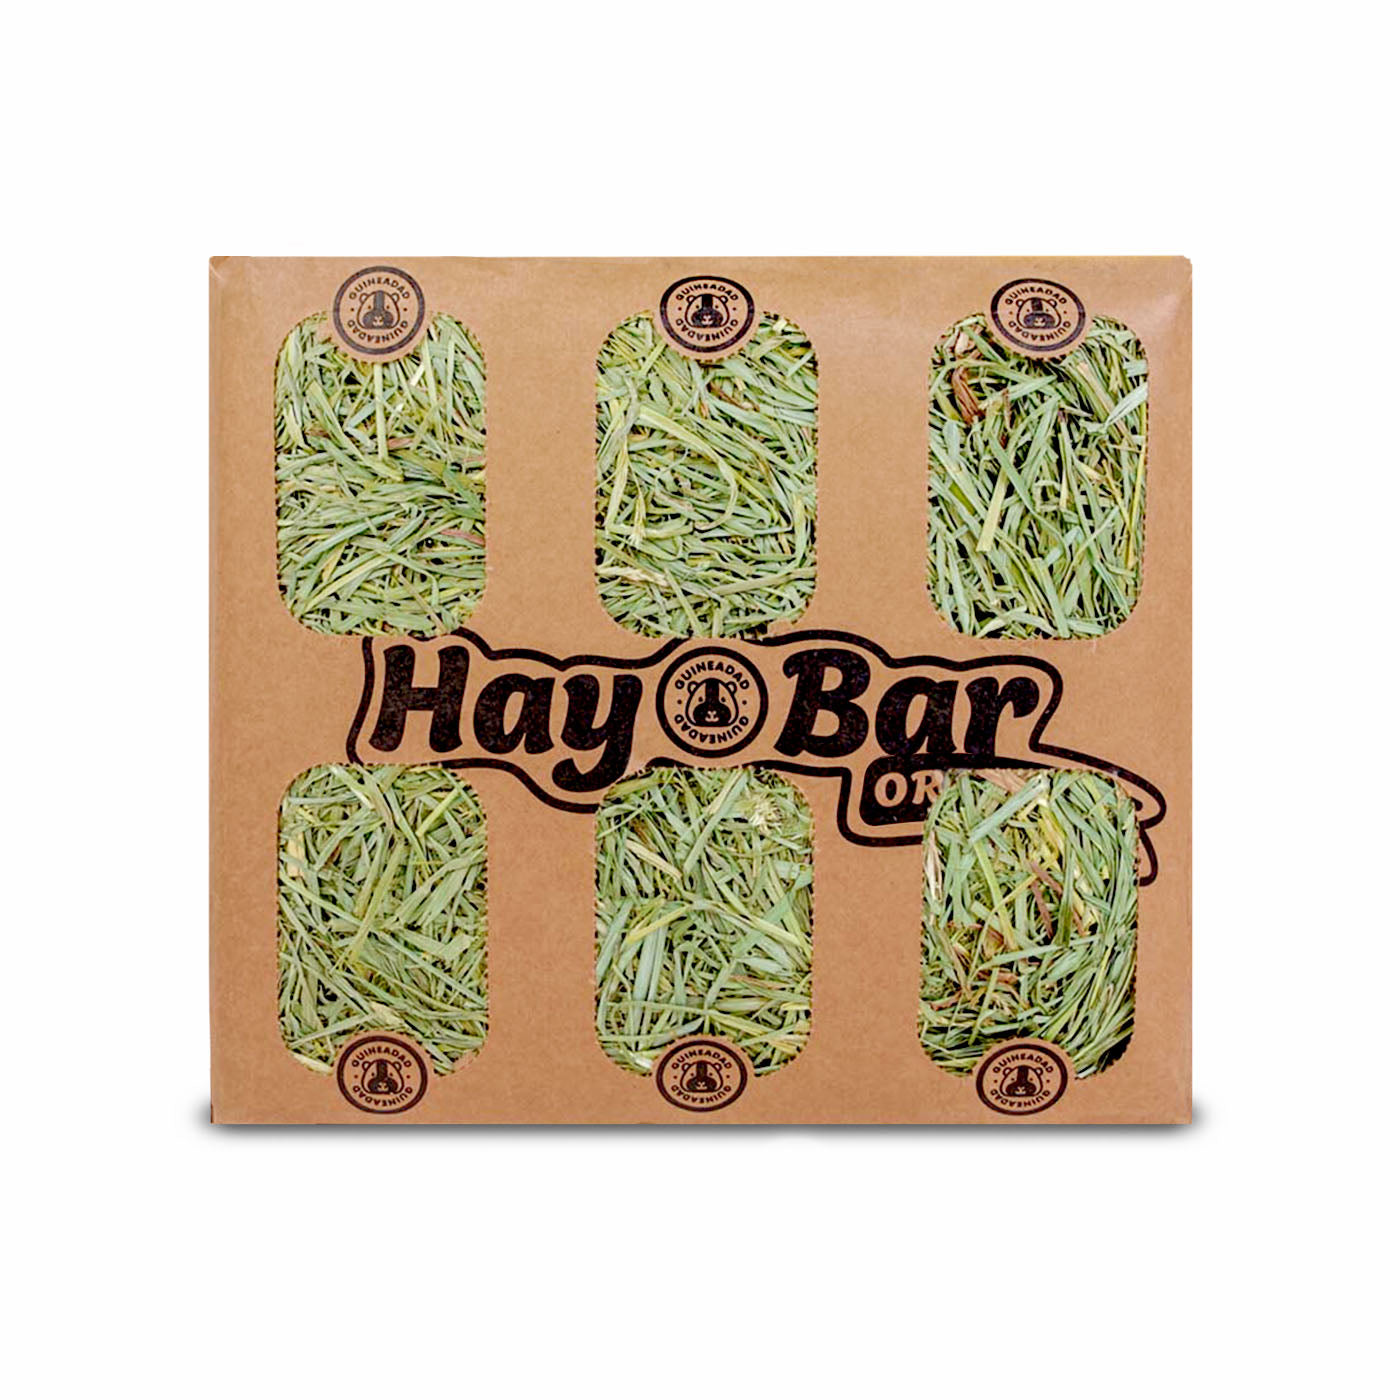 Orchard Hay Bar for Guinea Pigs (5 Pack)